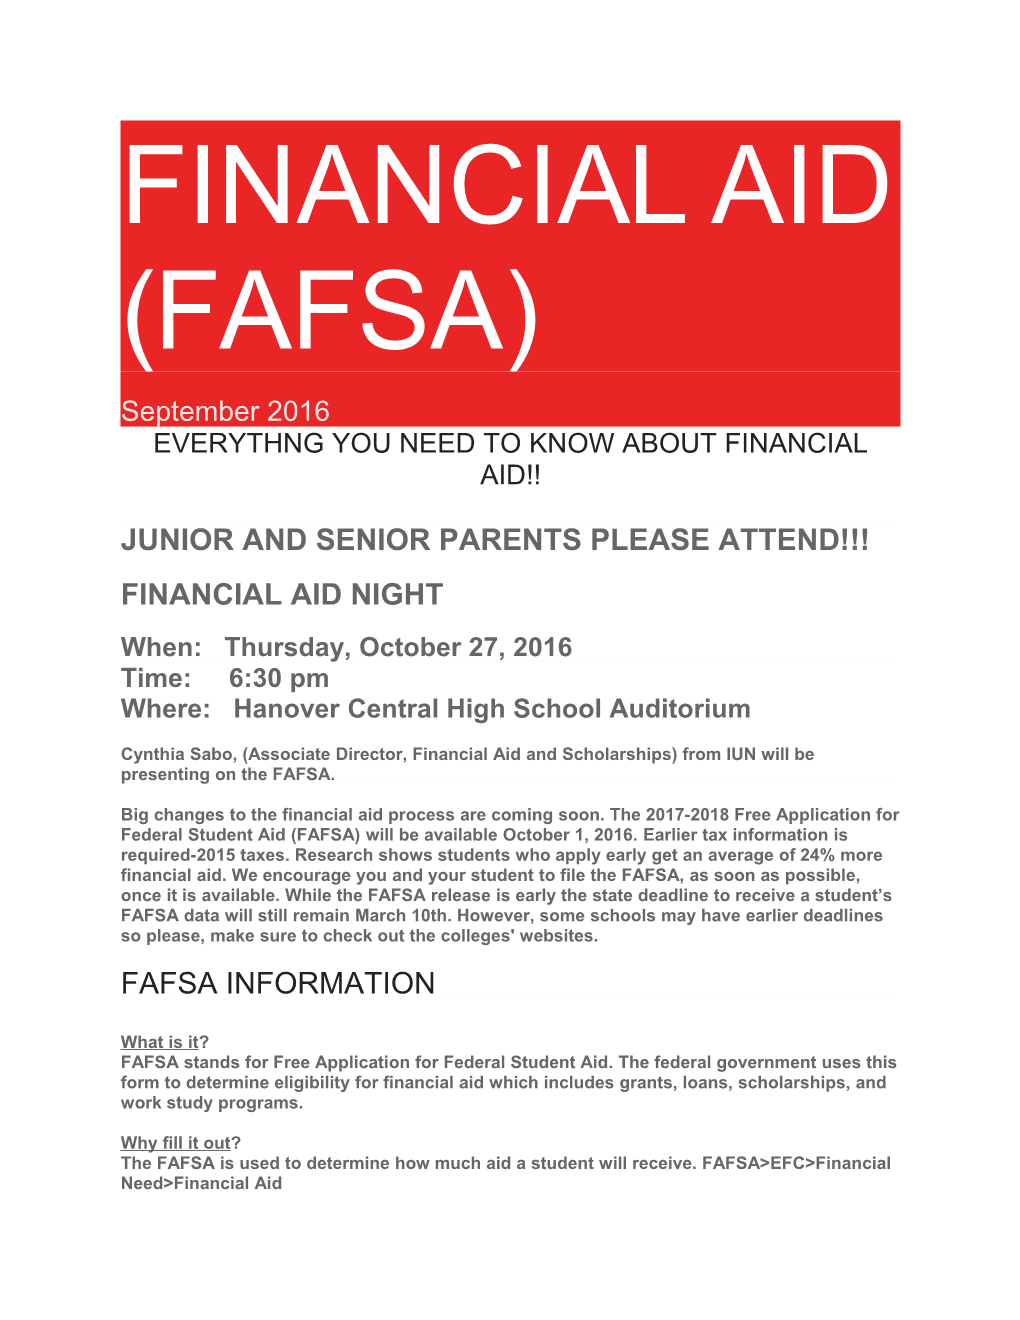 Everythng You Need to Know About Financial Aid